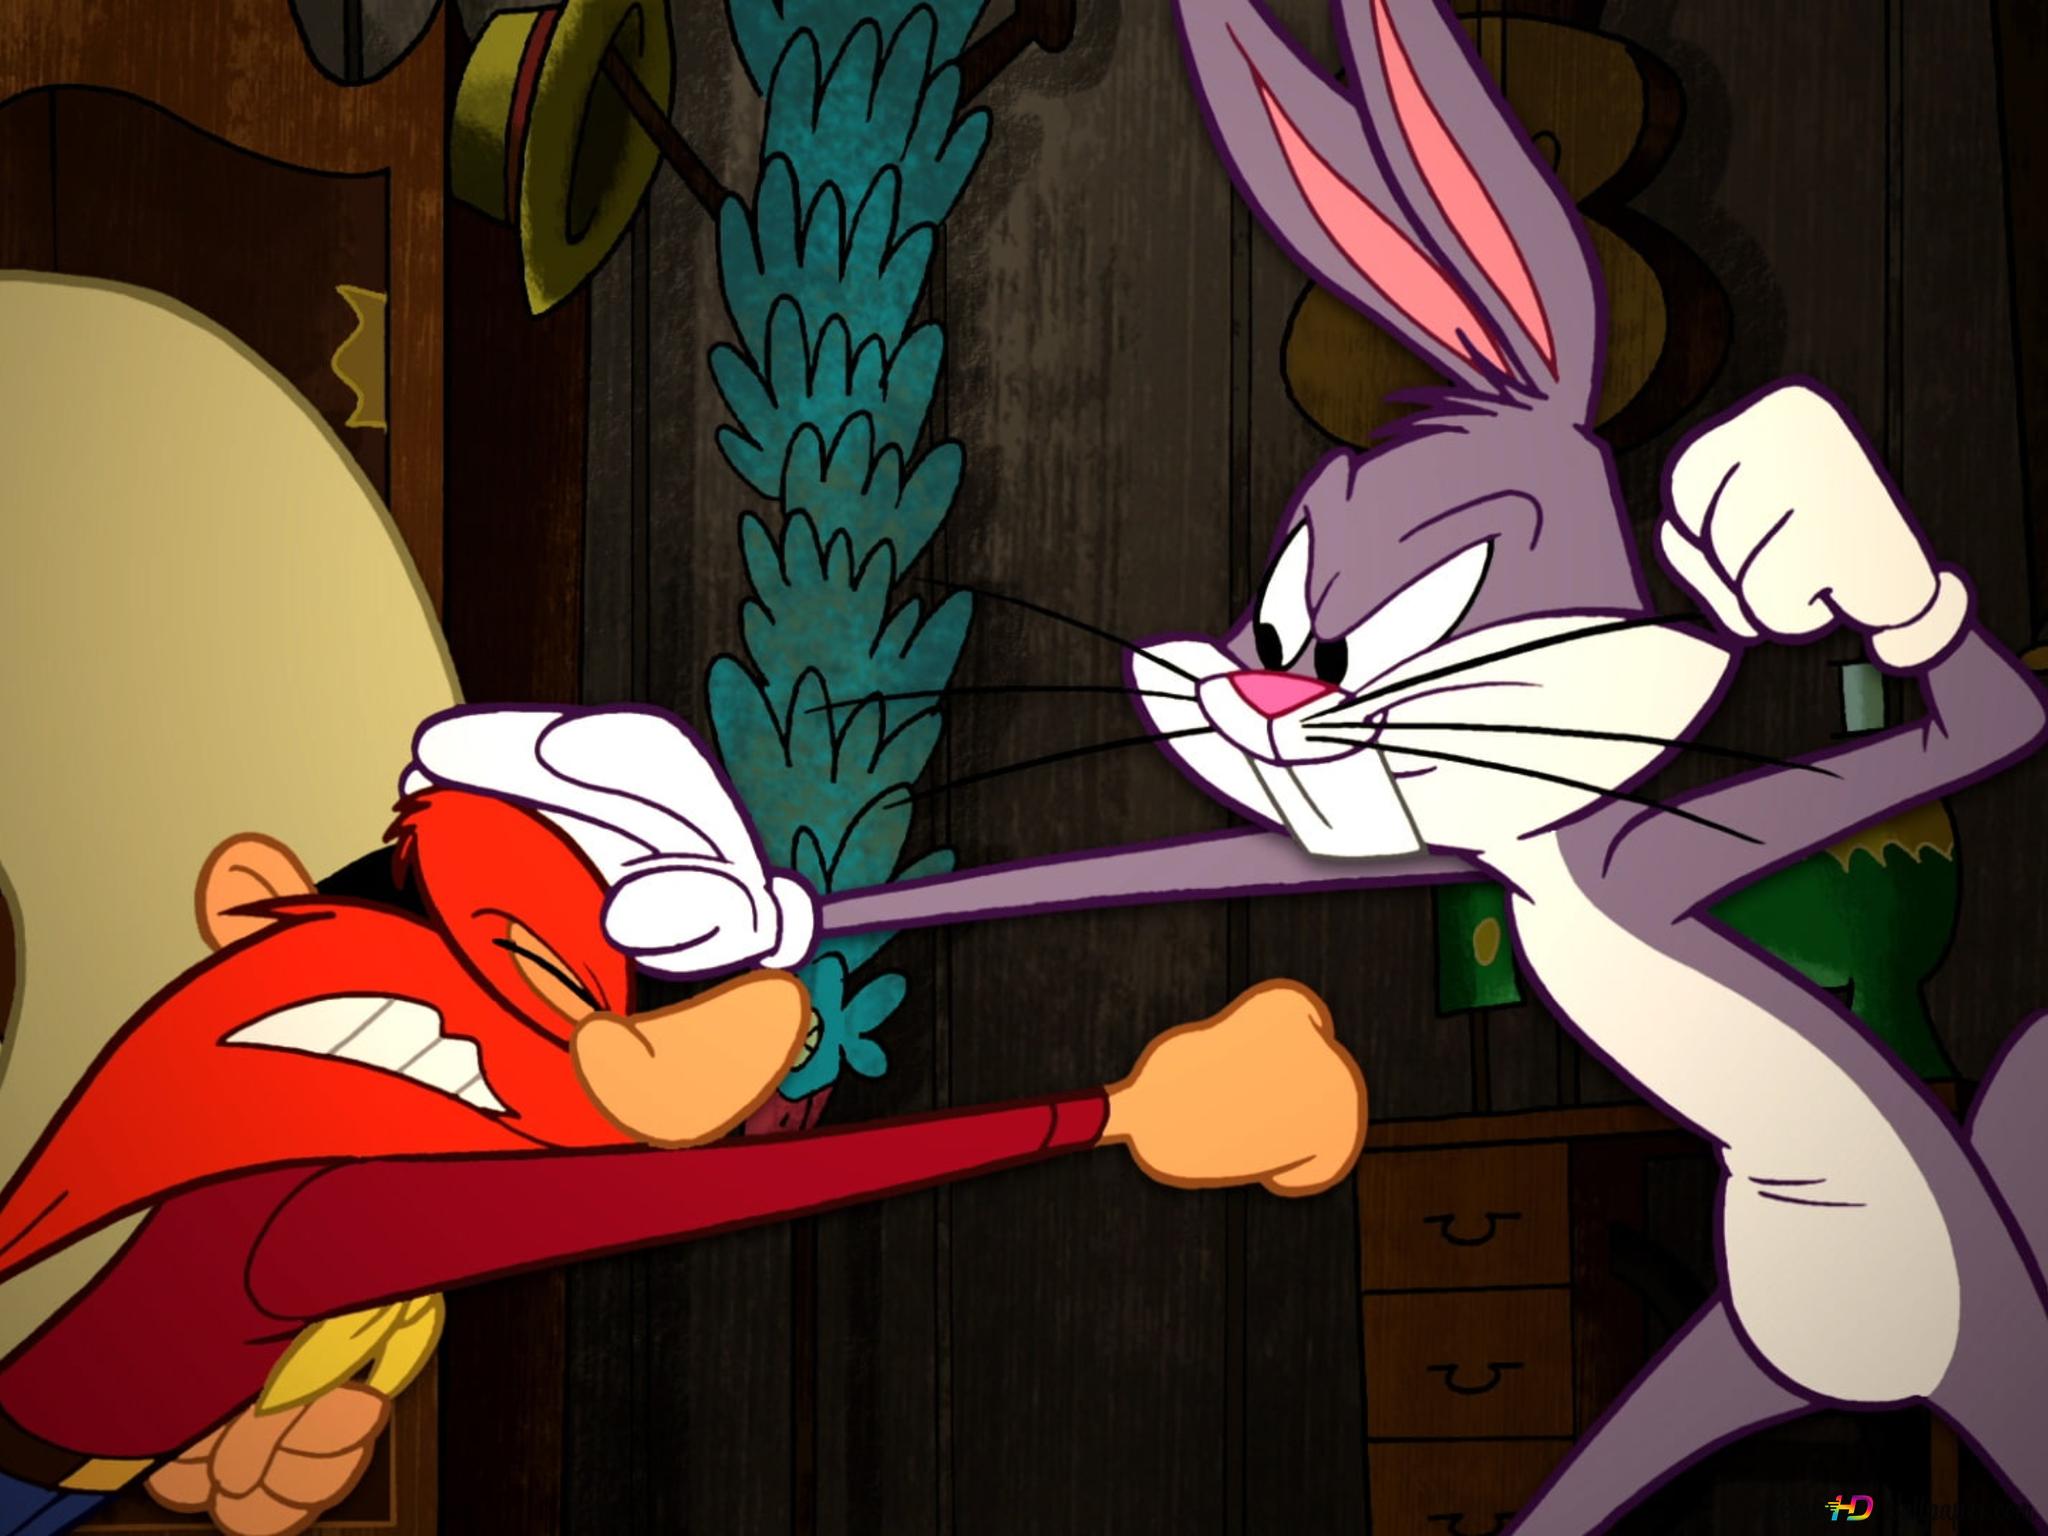 A cartoon character is punching another one - Bugs Bunny